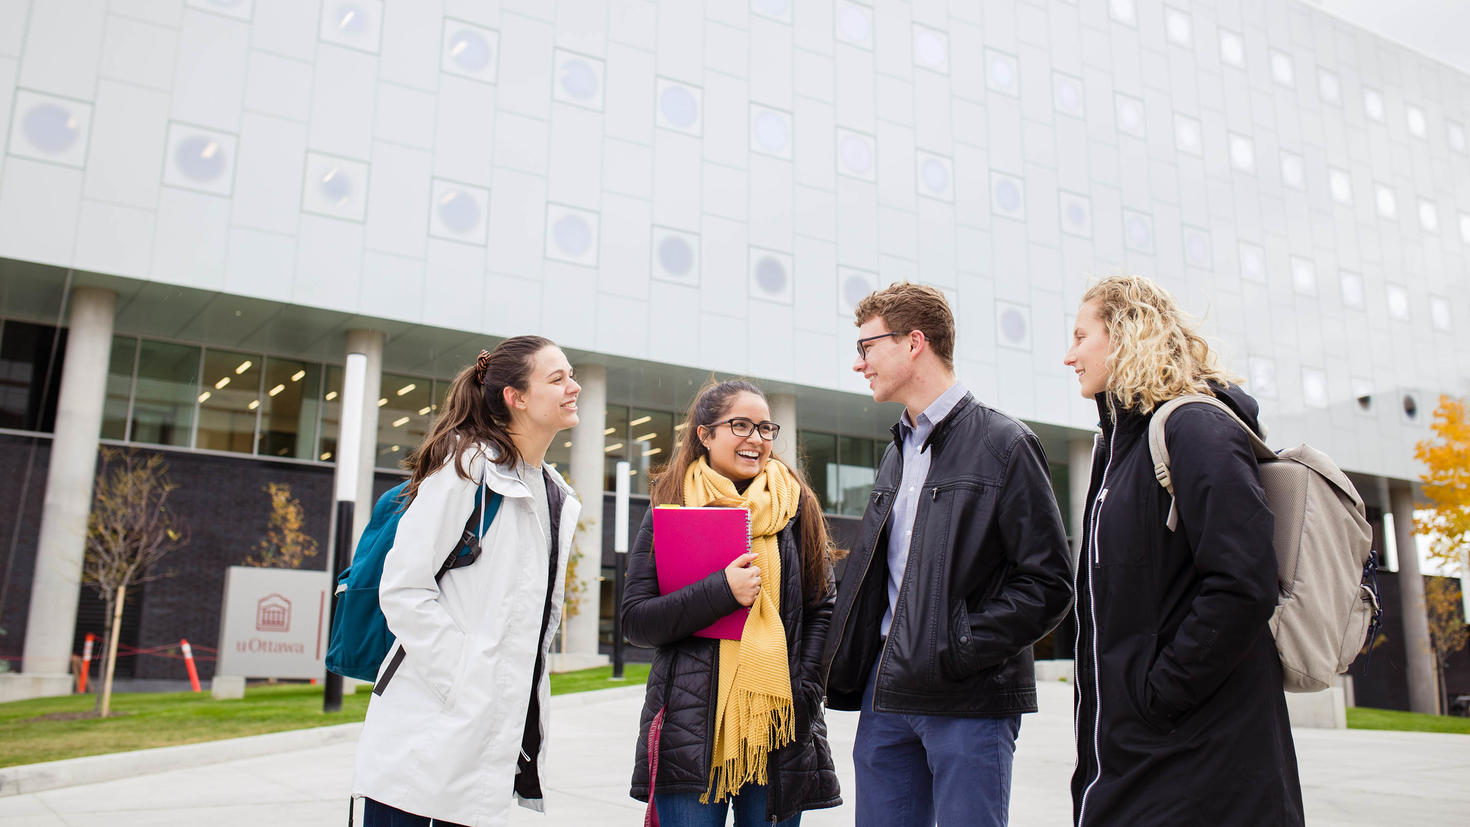 Students having a discussion in front of the Stem building